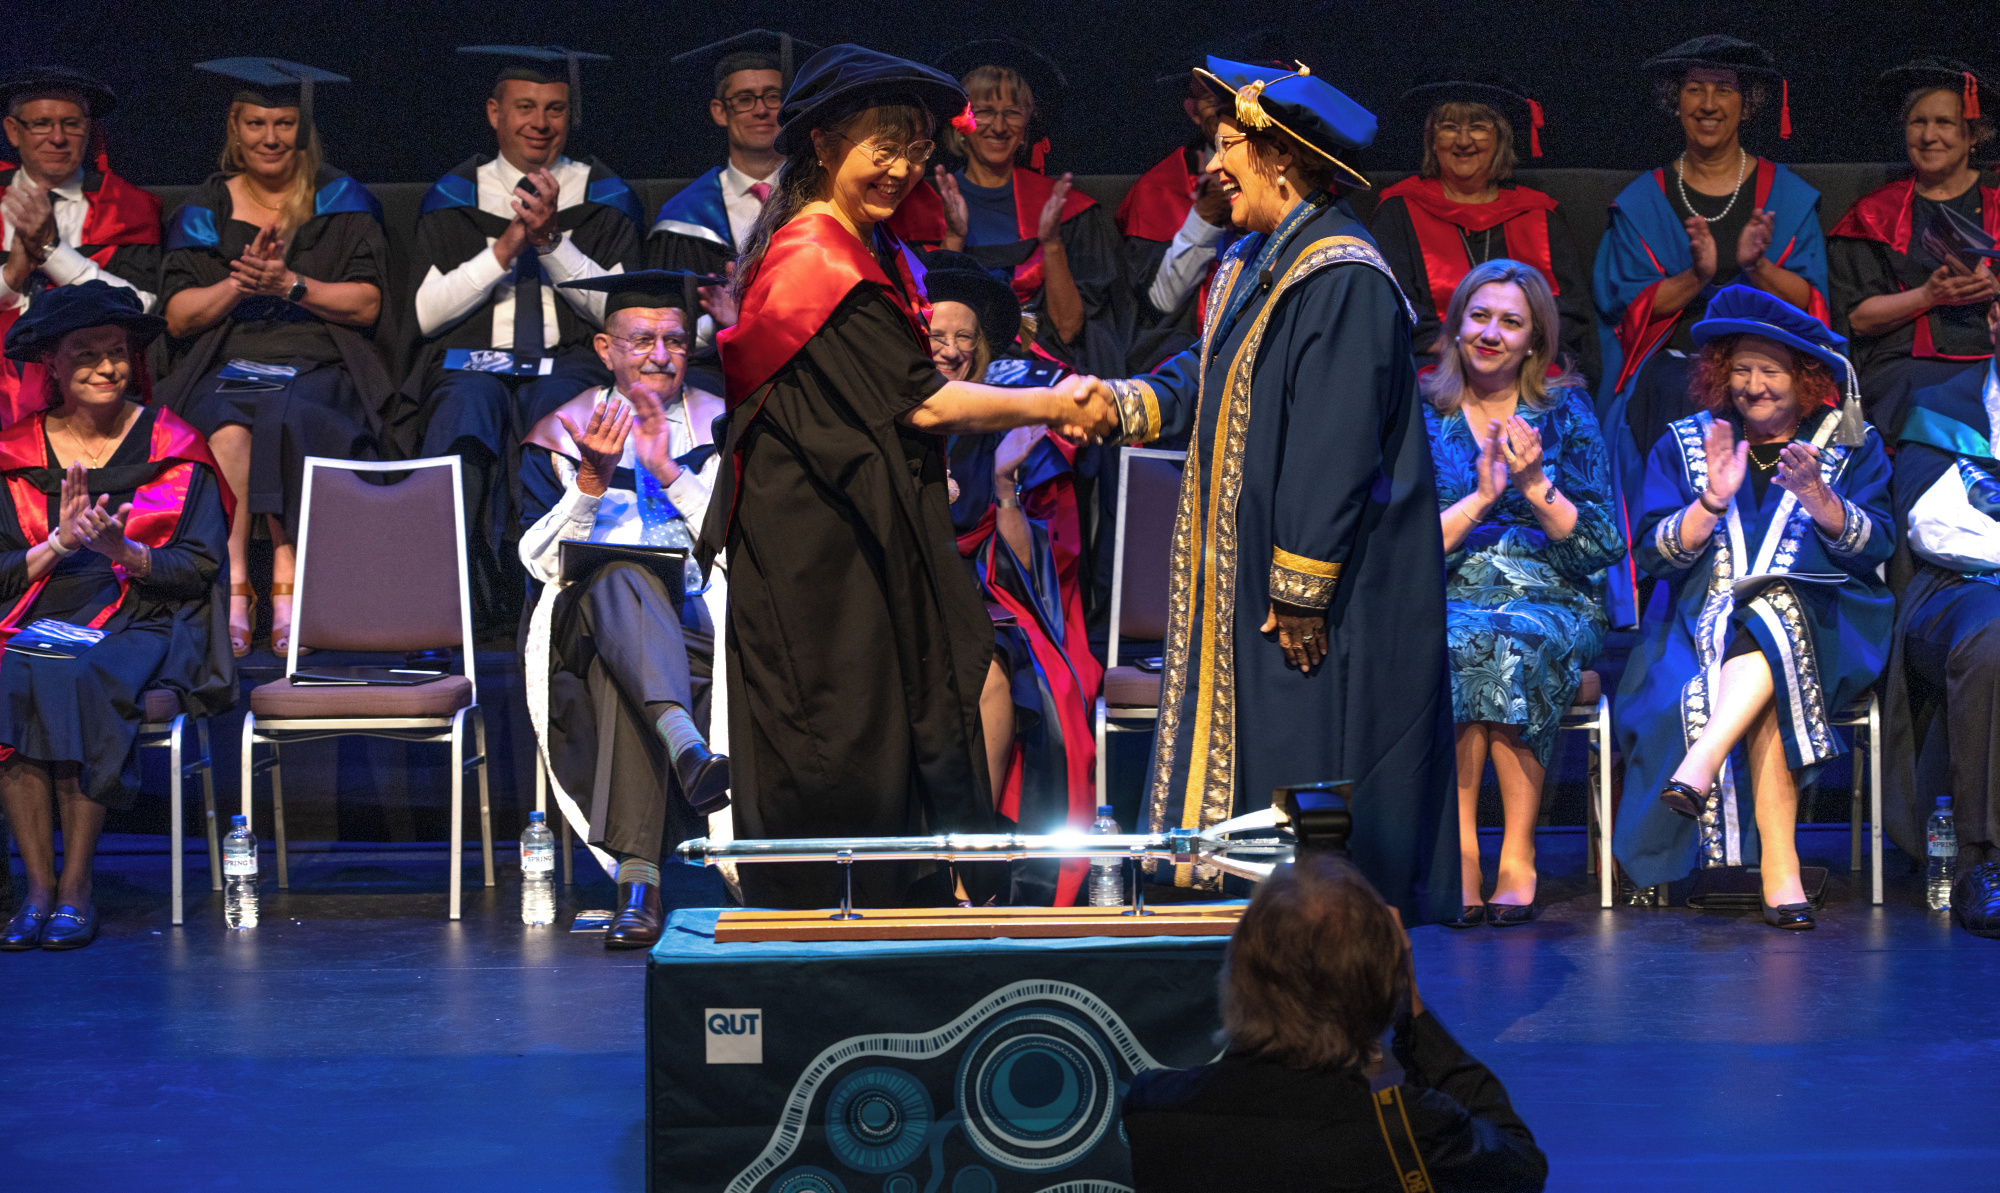 woman in academic gown shakes hand of another woman in academic gown